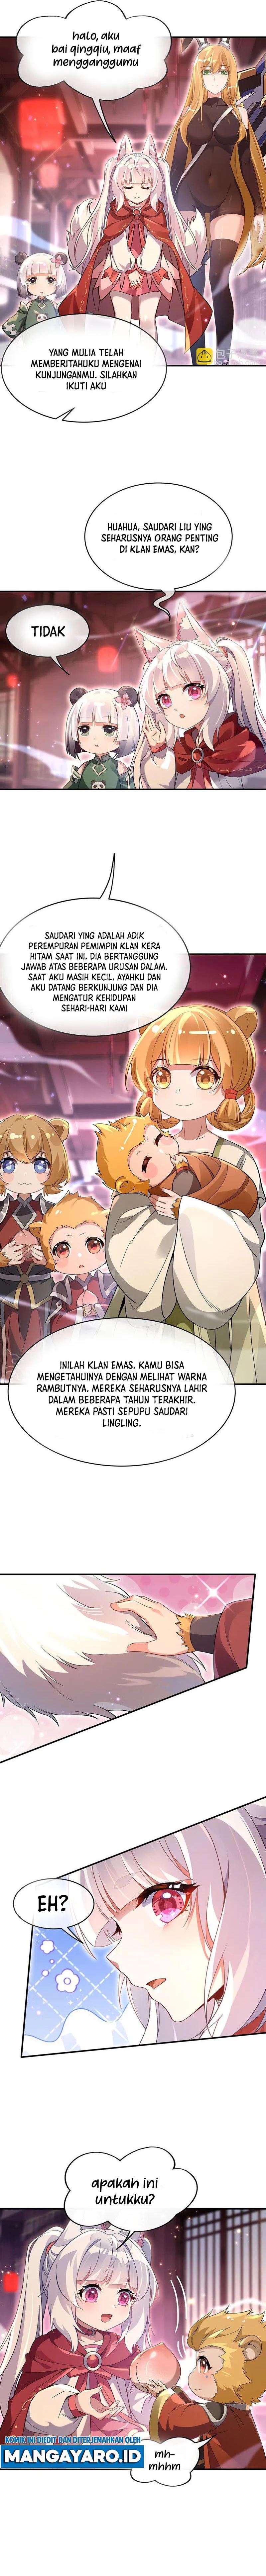 Dilarang COPAS - situs resmi www.mangacanblog.com - Komik my female apprentices are all big shots from the future 229 - chapter 229 230 Indonesia my female apprentices are all big shots from the future 229 - chapter 229 Terbaru 4|Baca Manga Komik Indonesia|Mangacan